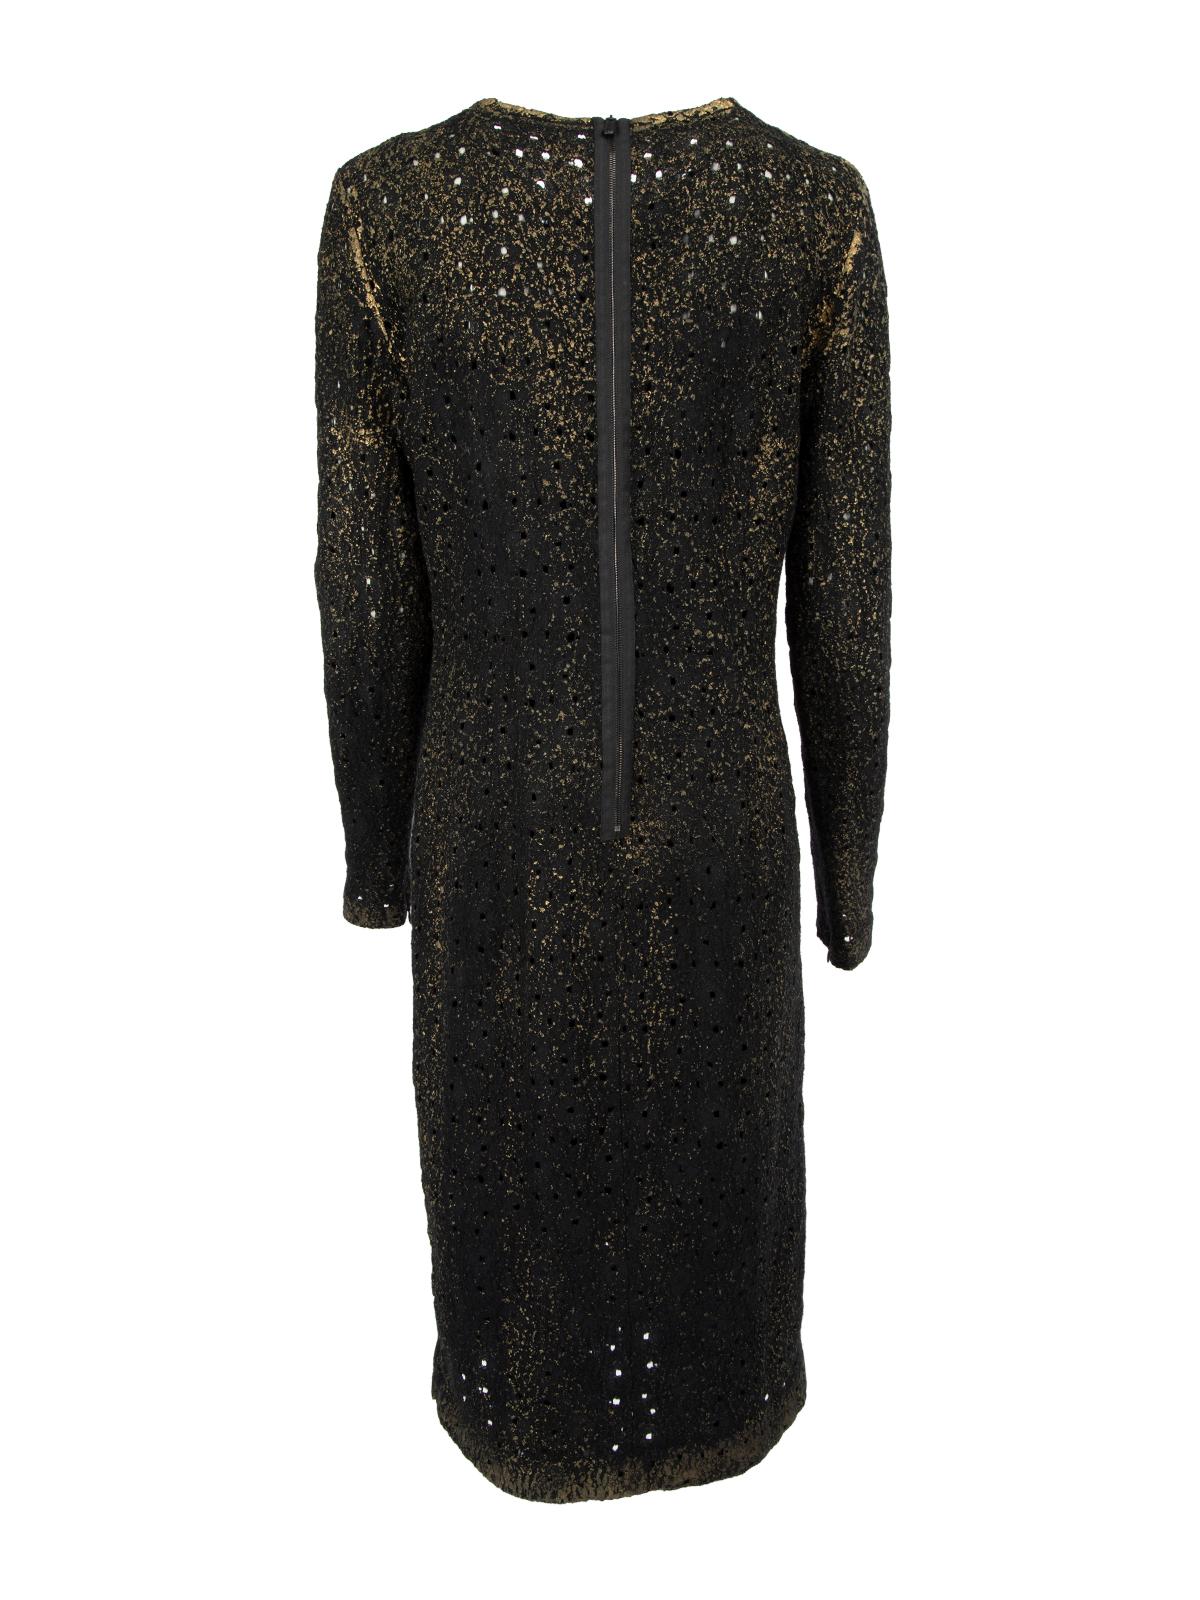 Pre-Loved Bottega Veneta Women's Black and Gold Perforated Dress In Excellent Condition For Sale In London, GB